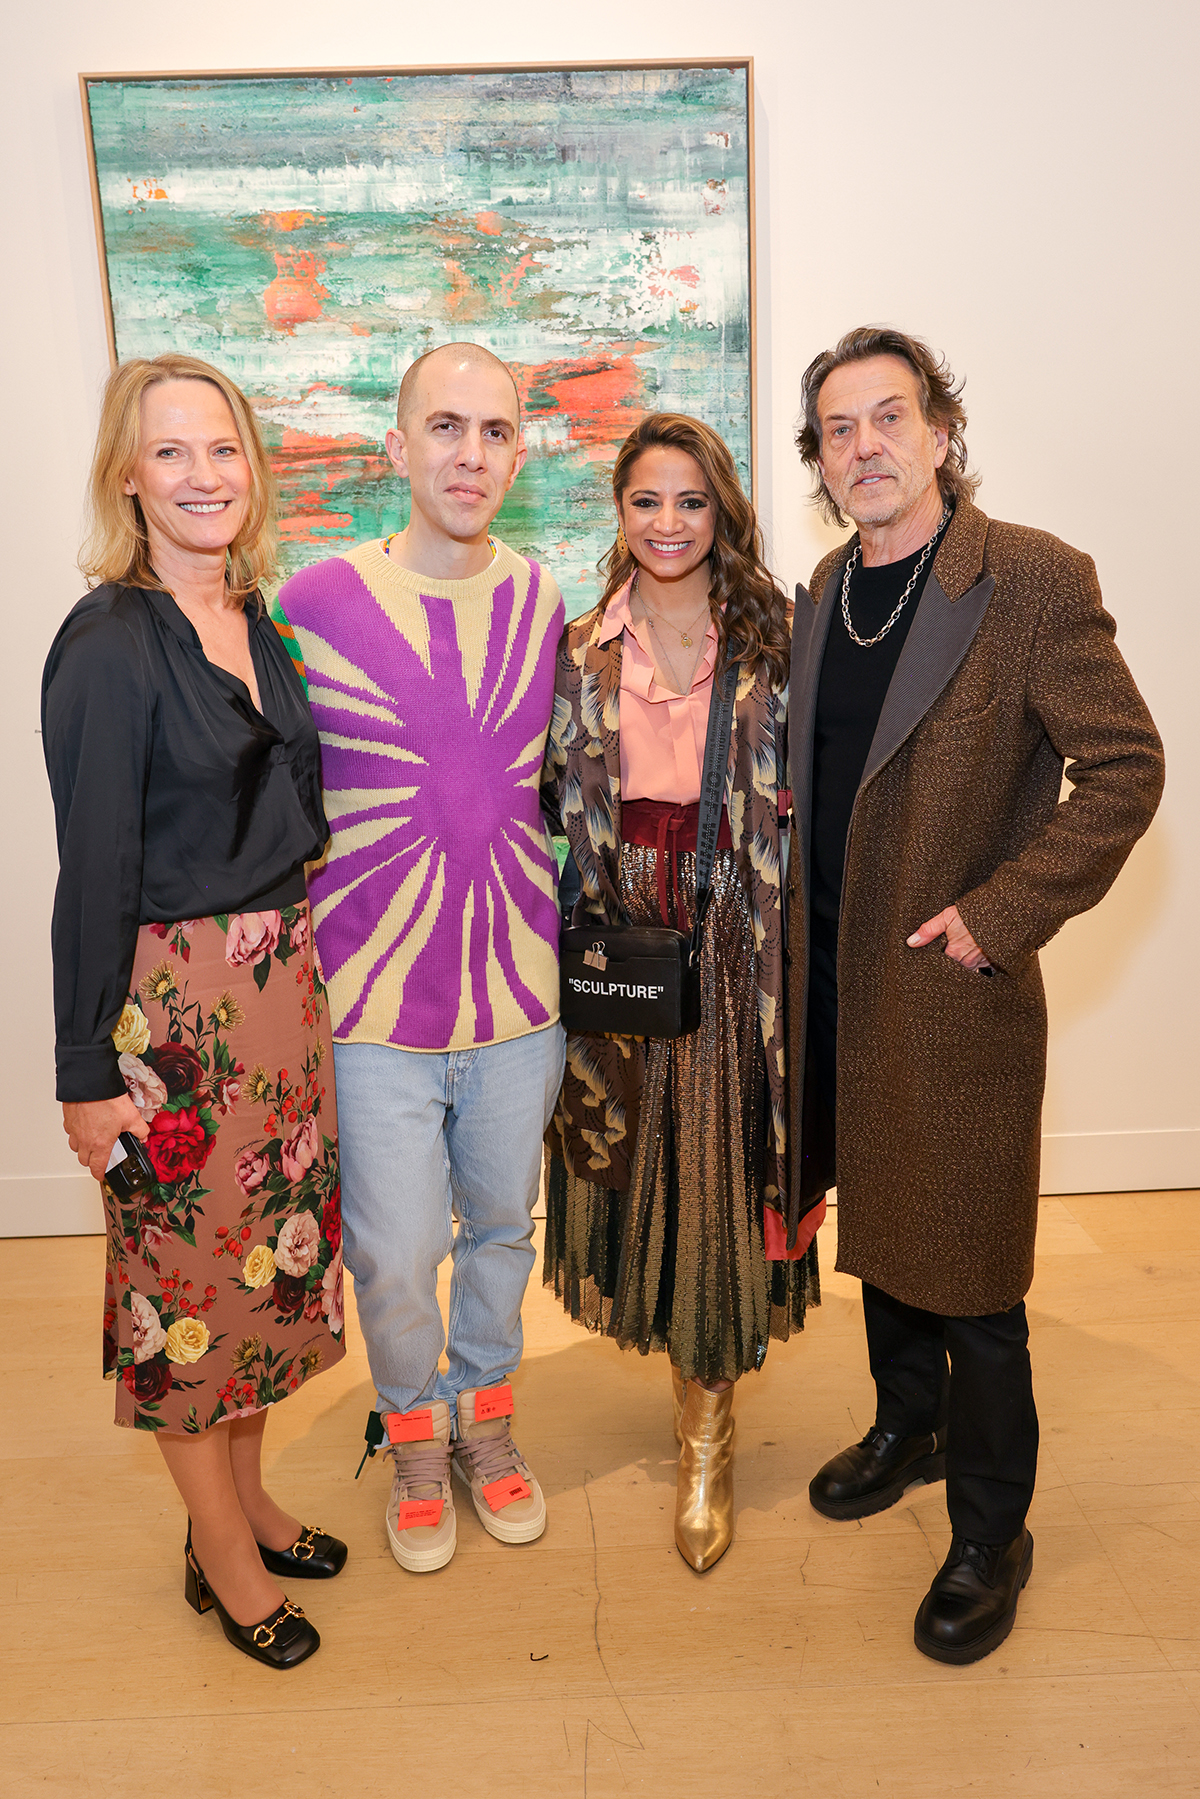 A woman wearing a floral skirt standing next to a man wearing a purple jumper and orange trainers next a woman and man wearing brown and pink clothes